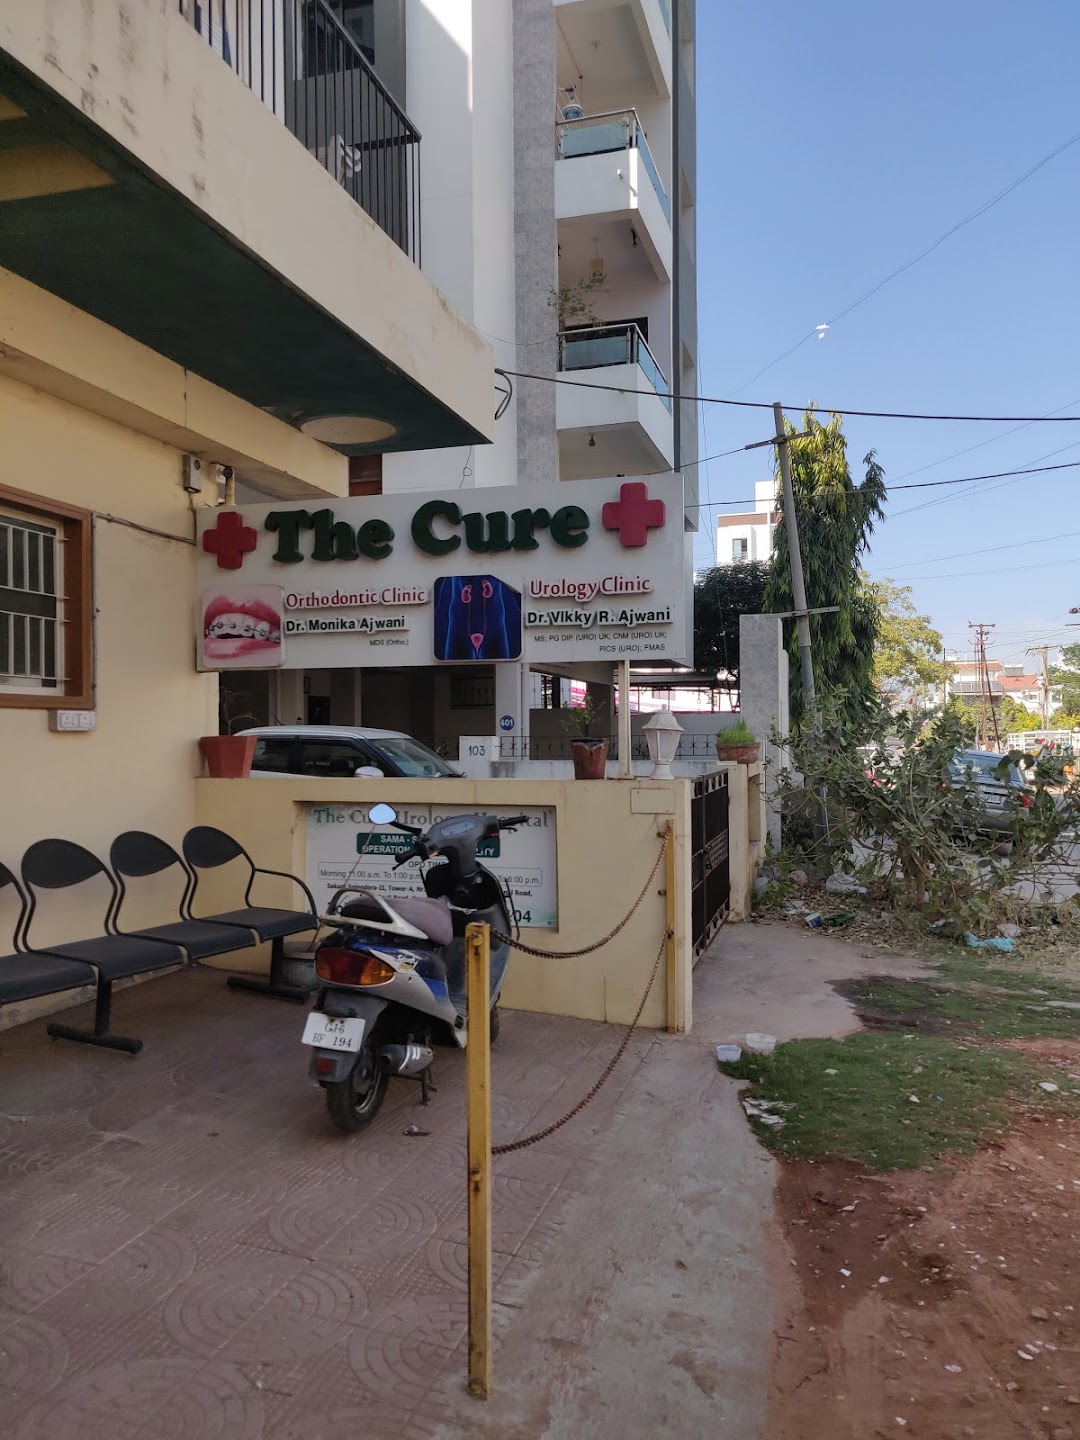 The Cure Urology Clinic